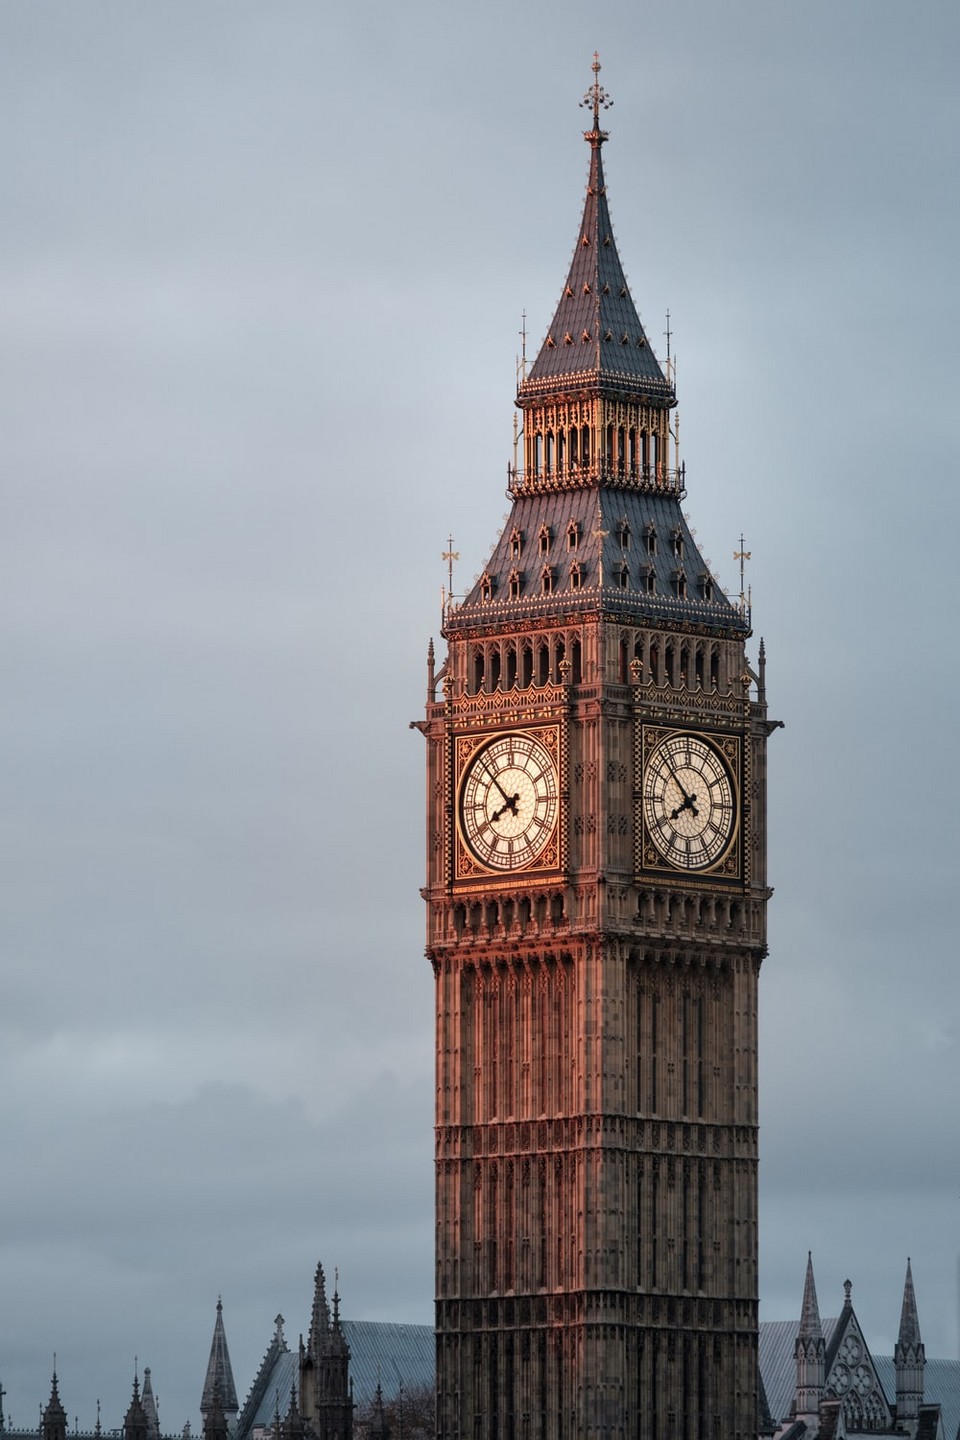 Must visit places in London Big Ben Clock Tower (3)